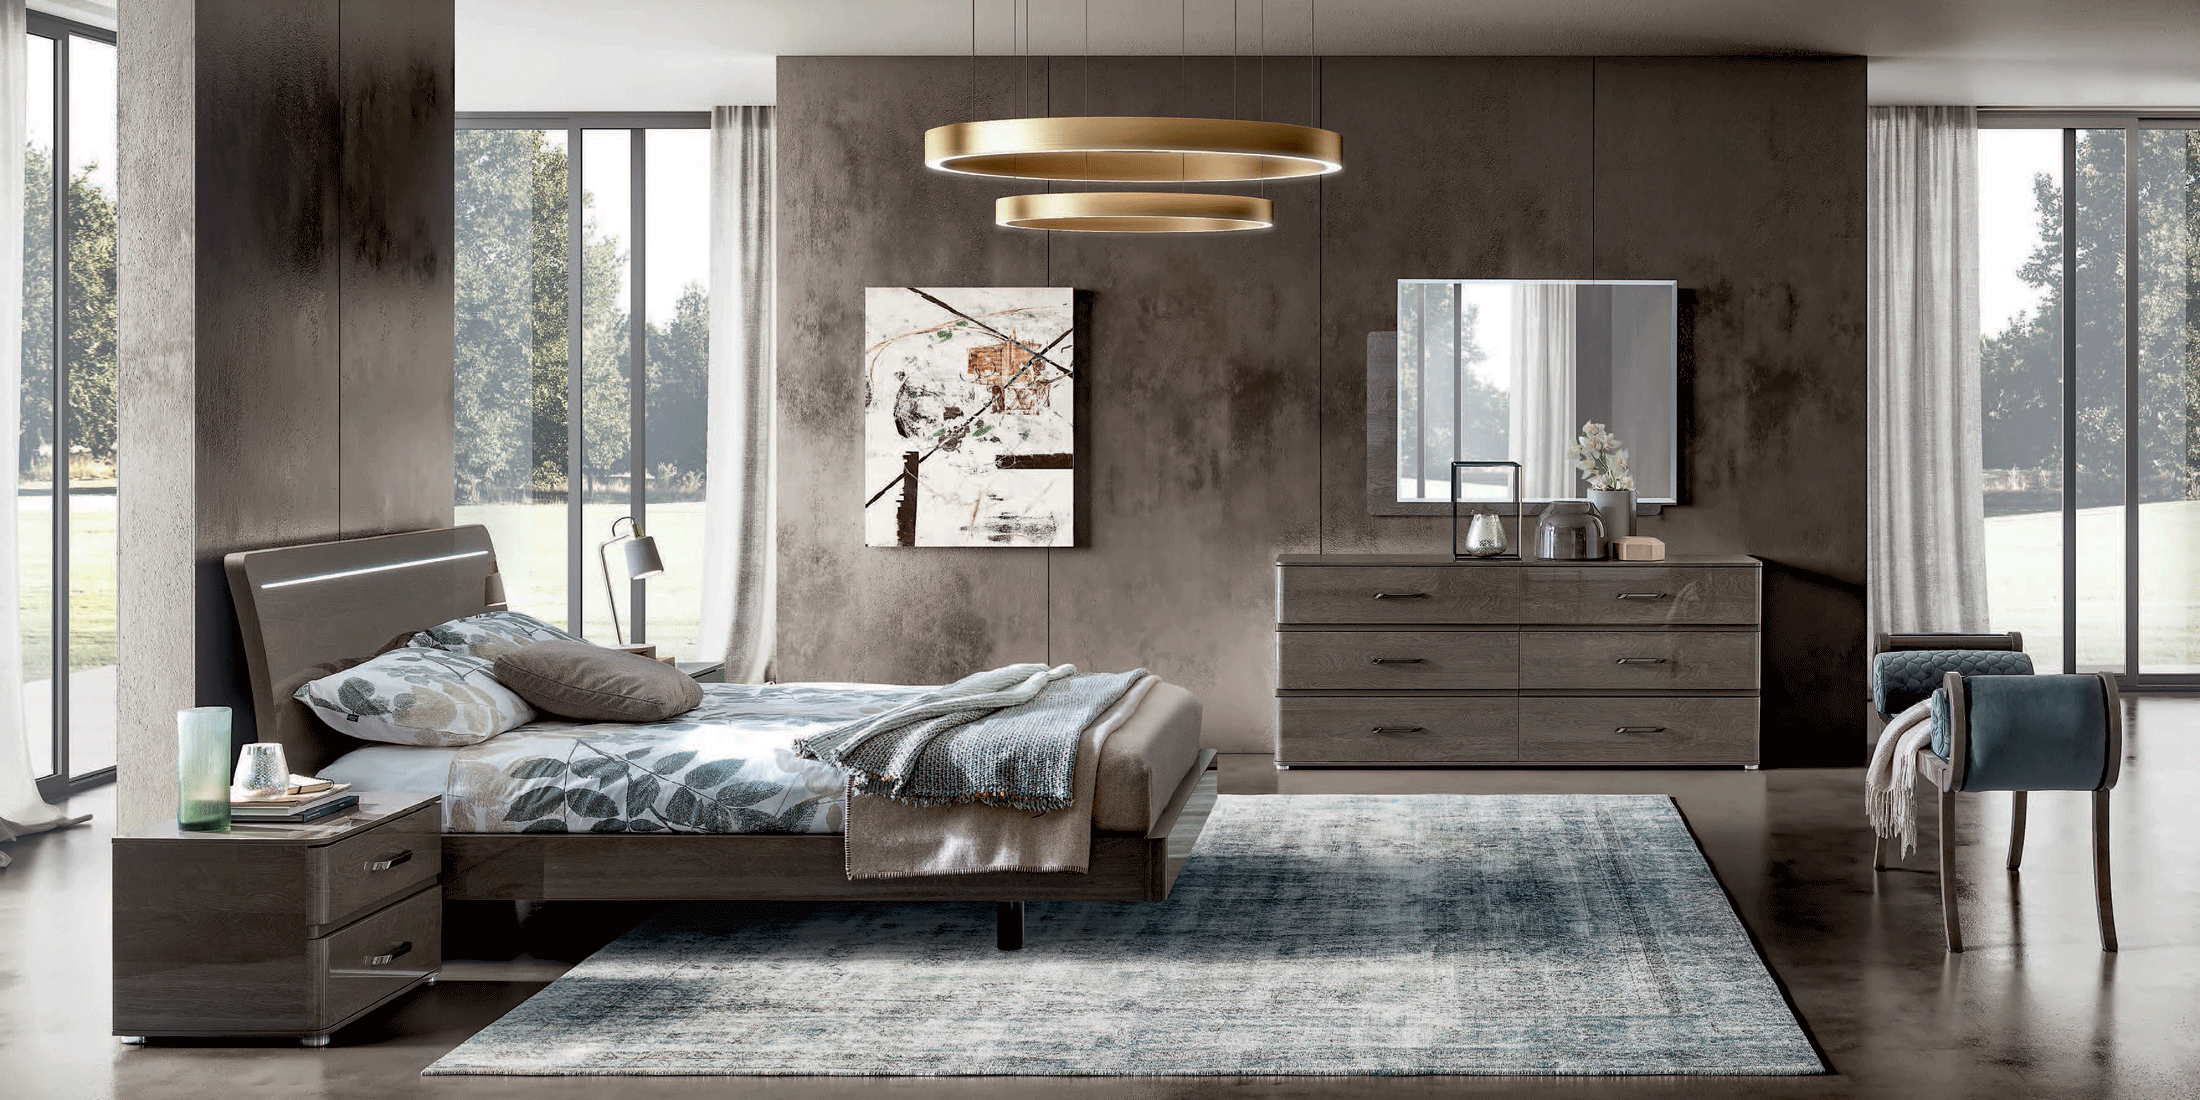 Bedroom Furniture Classic Bedrooms QS and KS Maia Additional Items